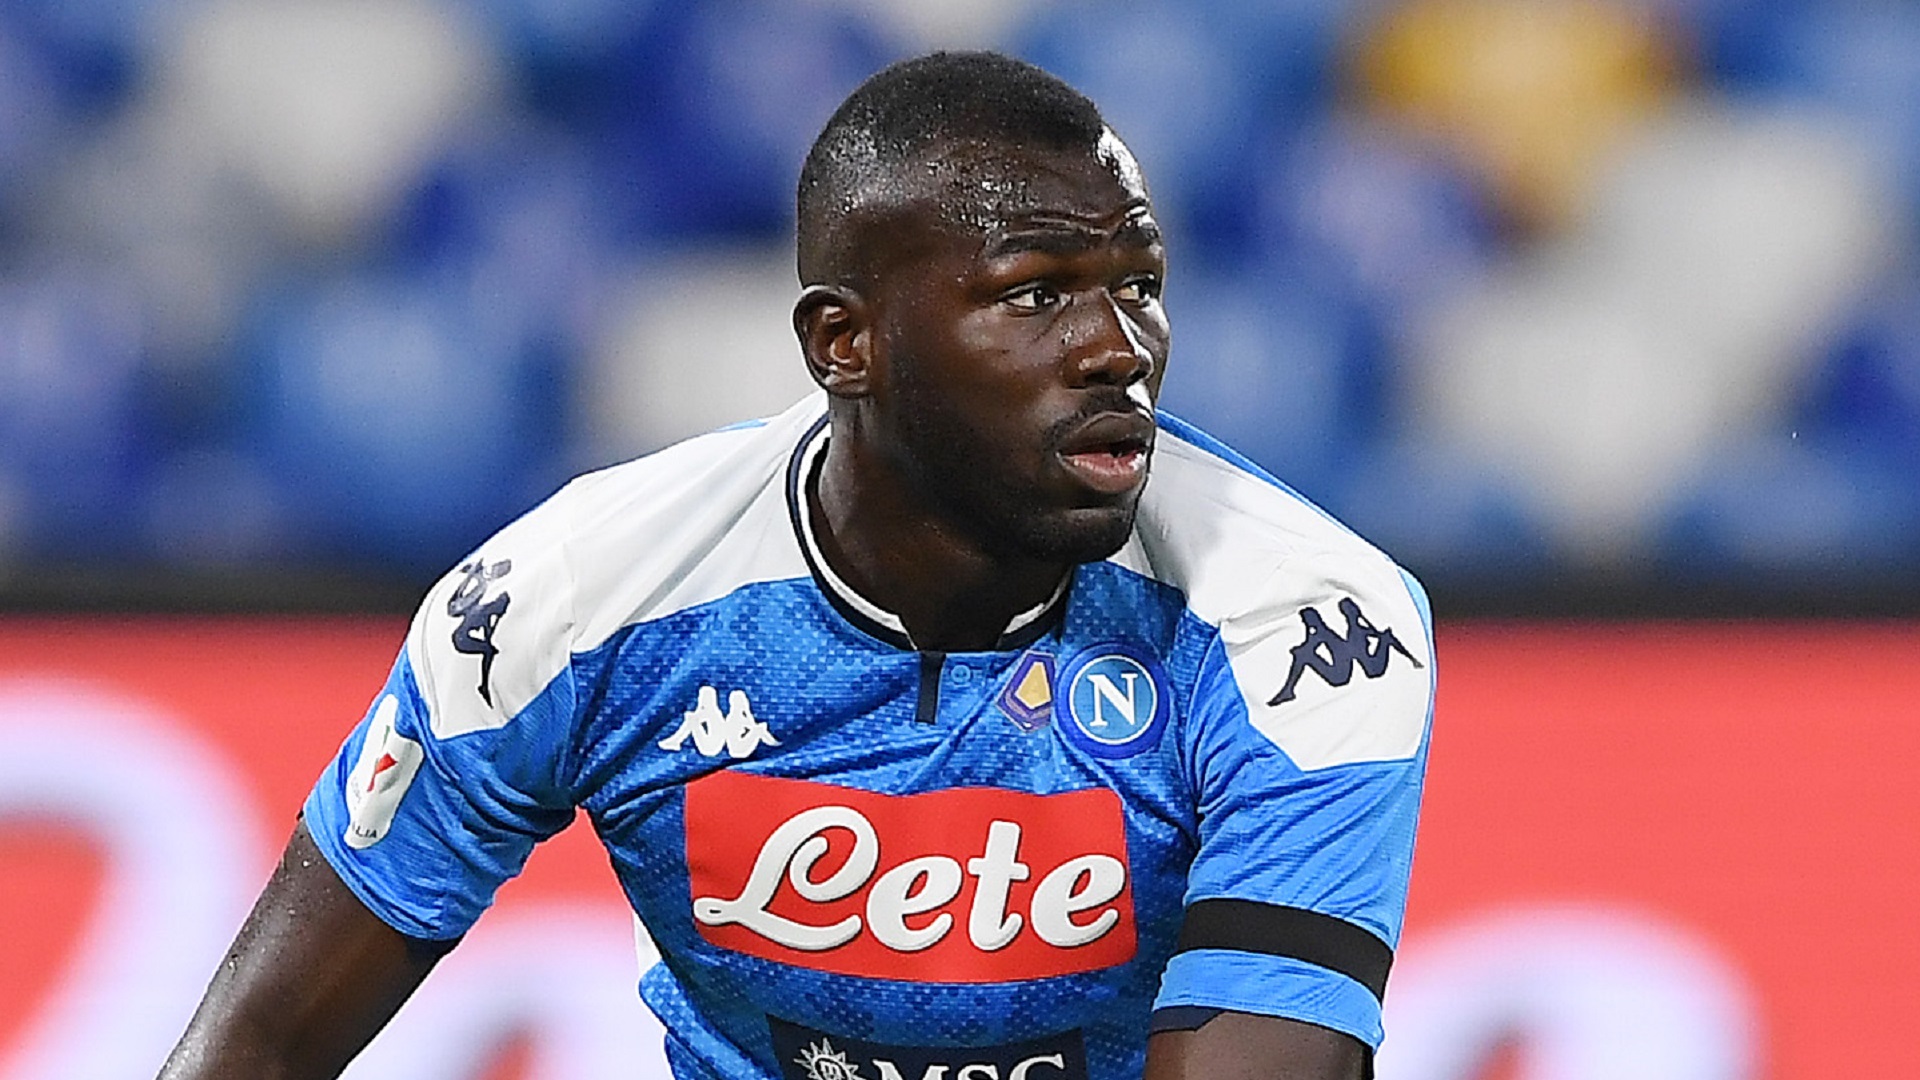 Man United, Everton and Liverpool Linked with Koulibaly - Where Should He Go? - The Cult of Calcio